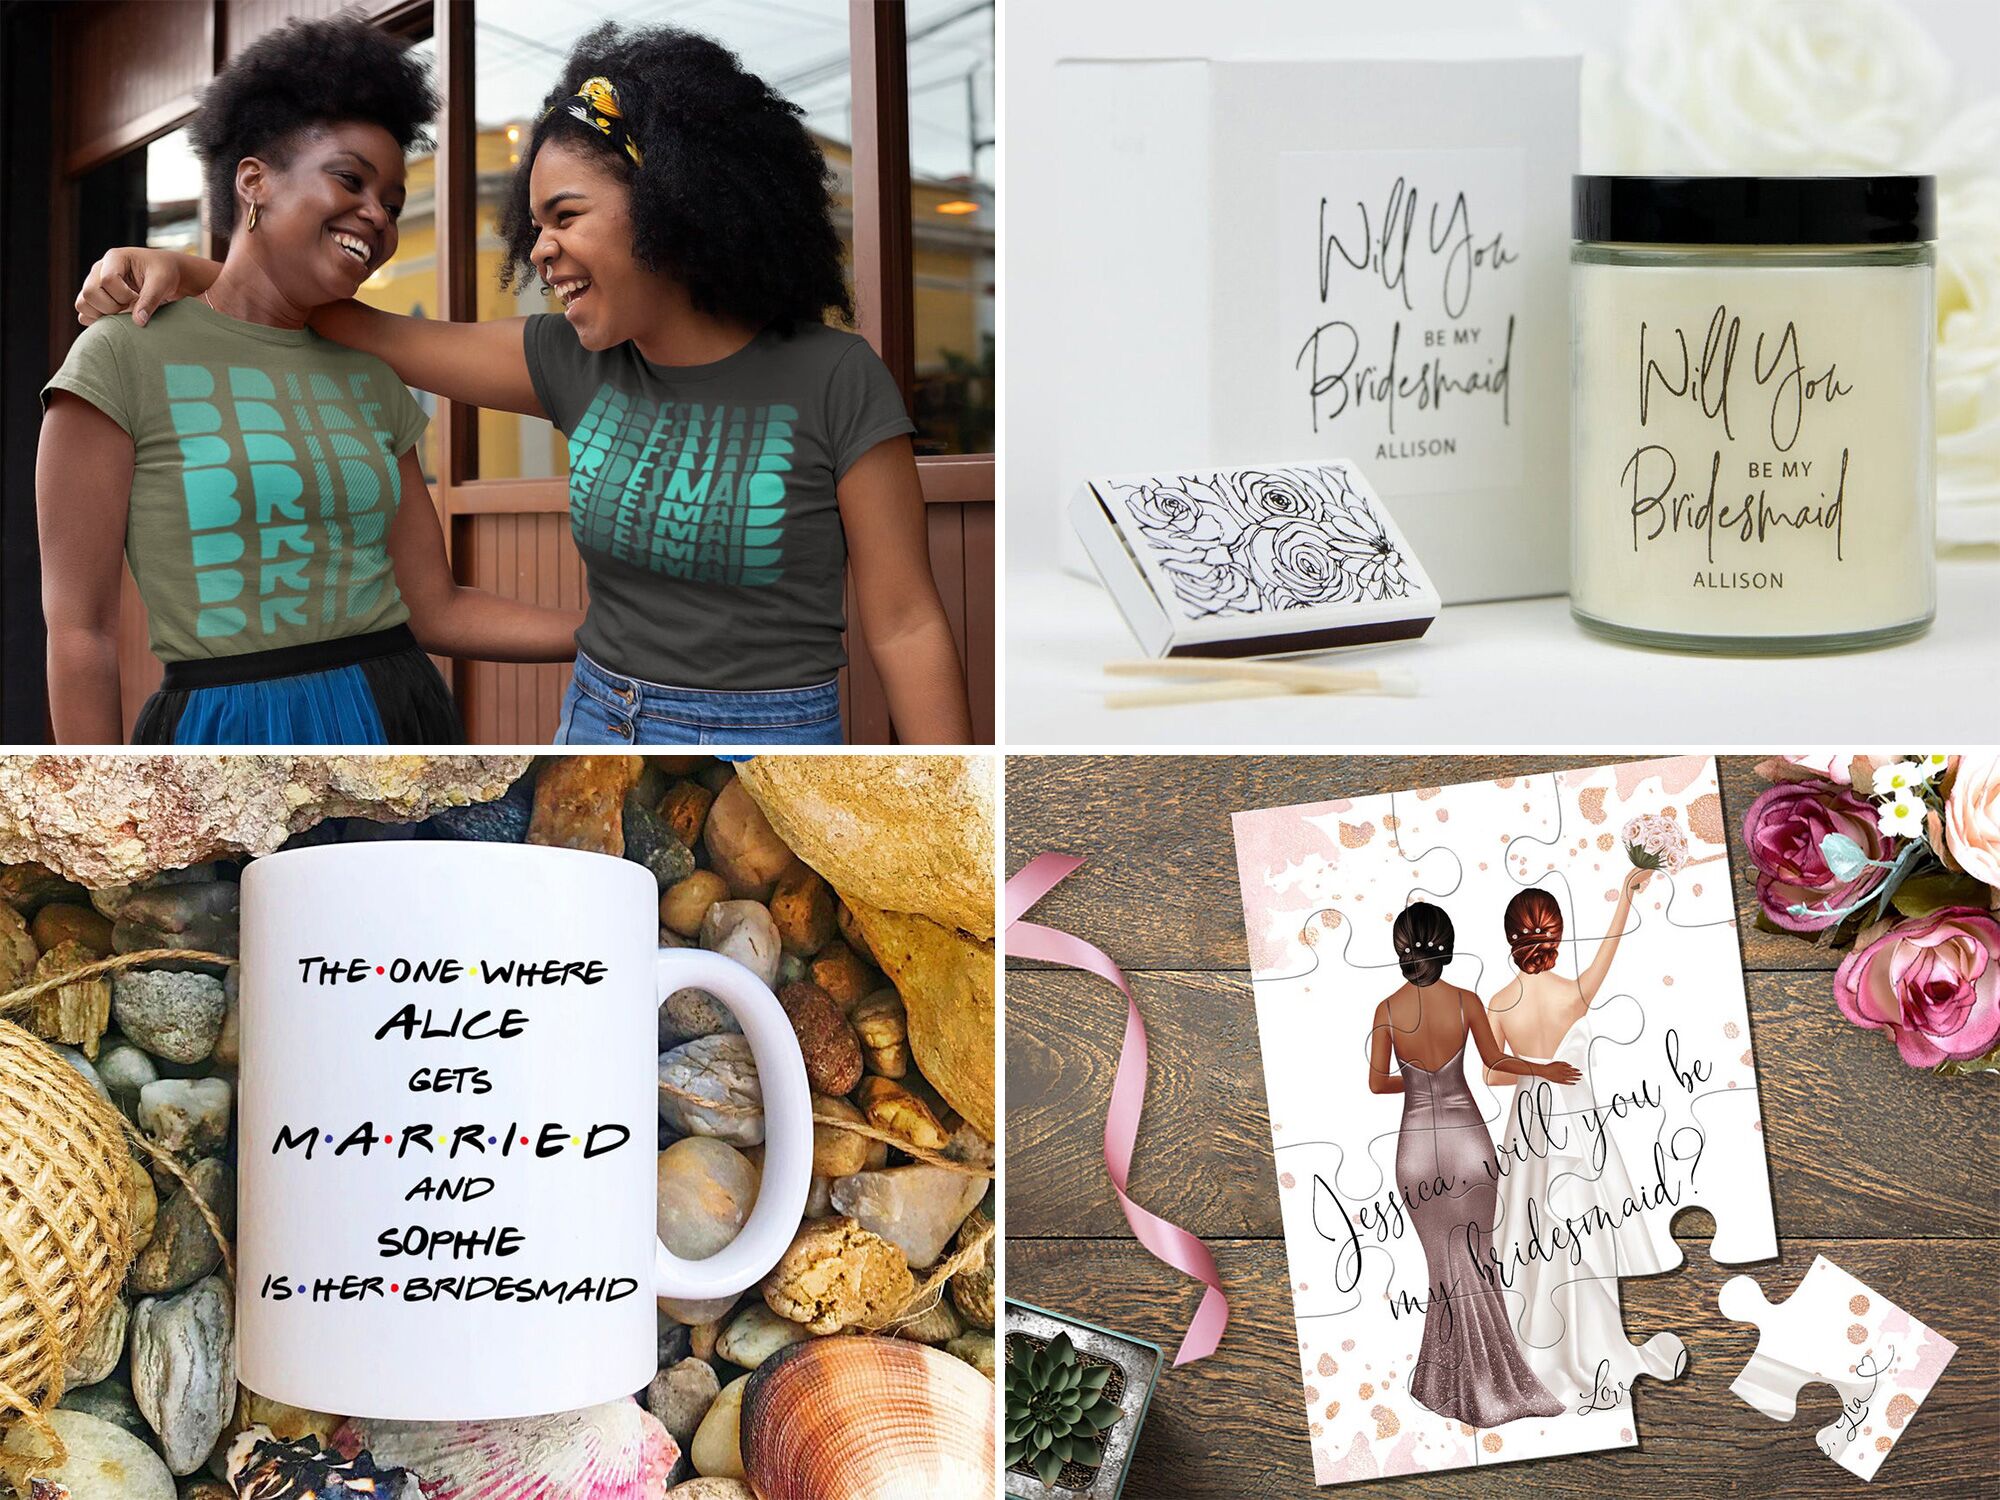 maid of honor gifts near me